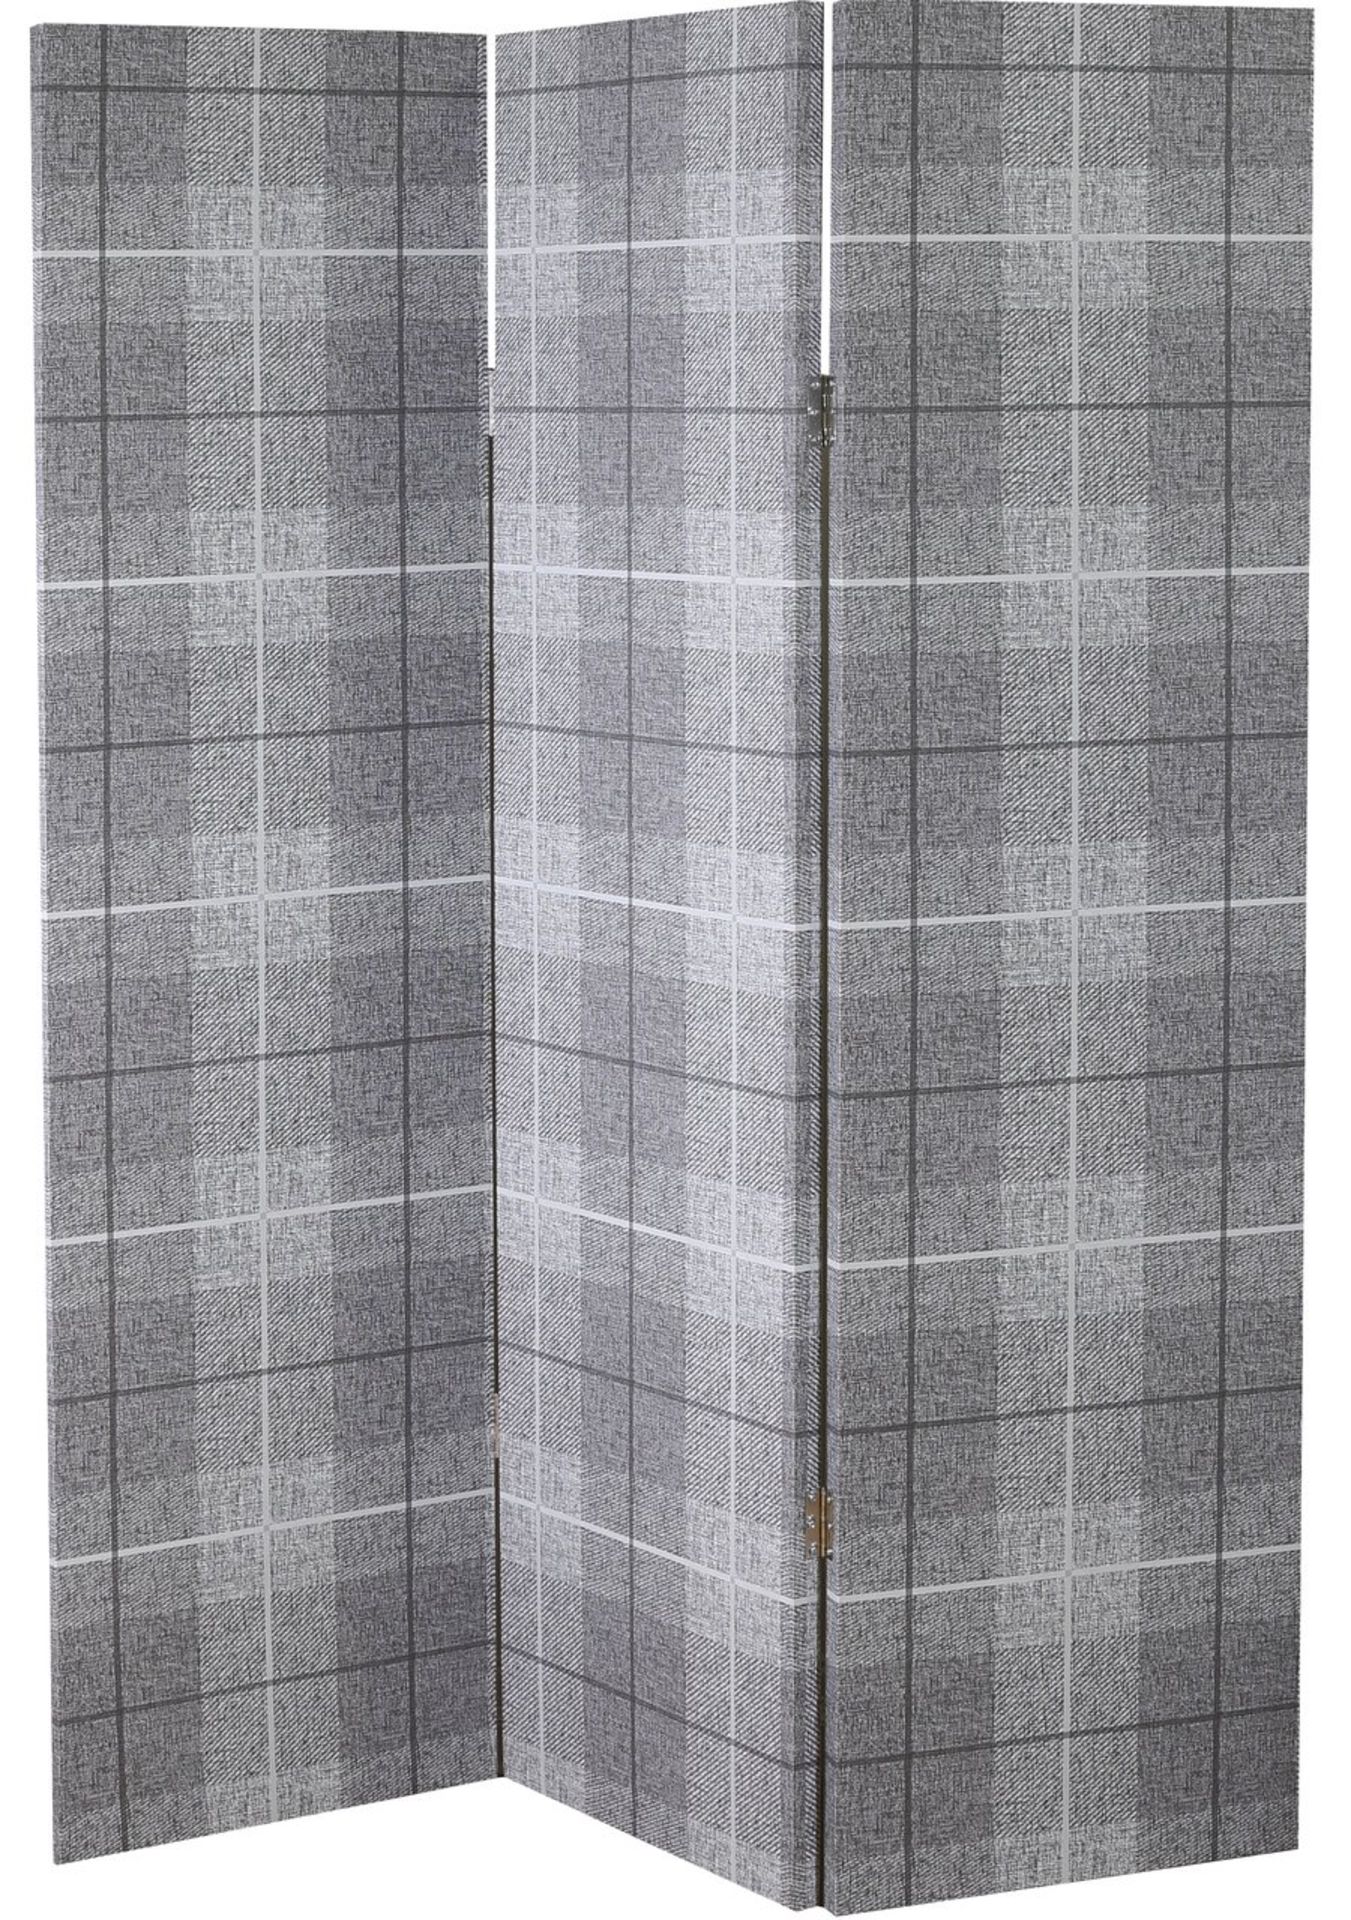 Arthouse Room Divider Country Check Charcoal Screen - £85.99 - Image 2 of 2